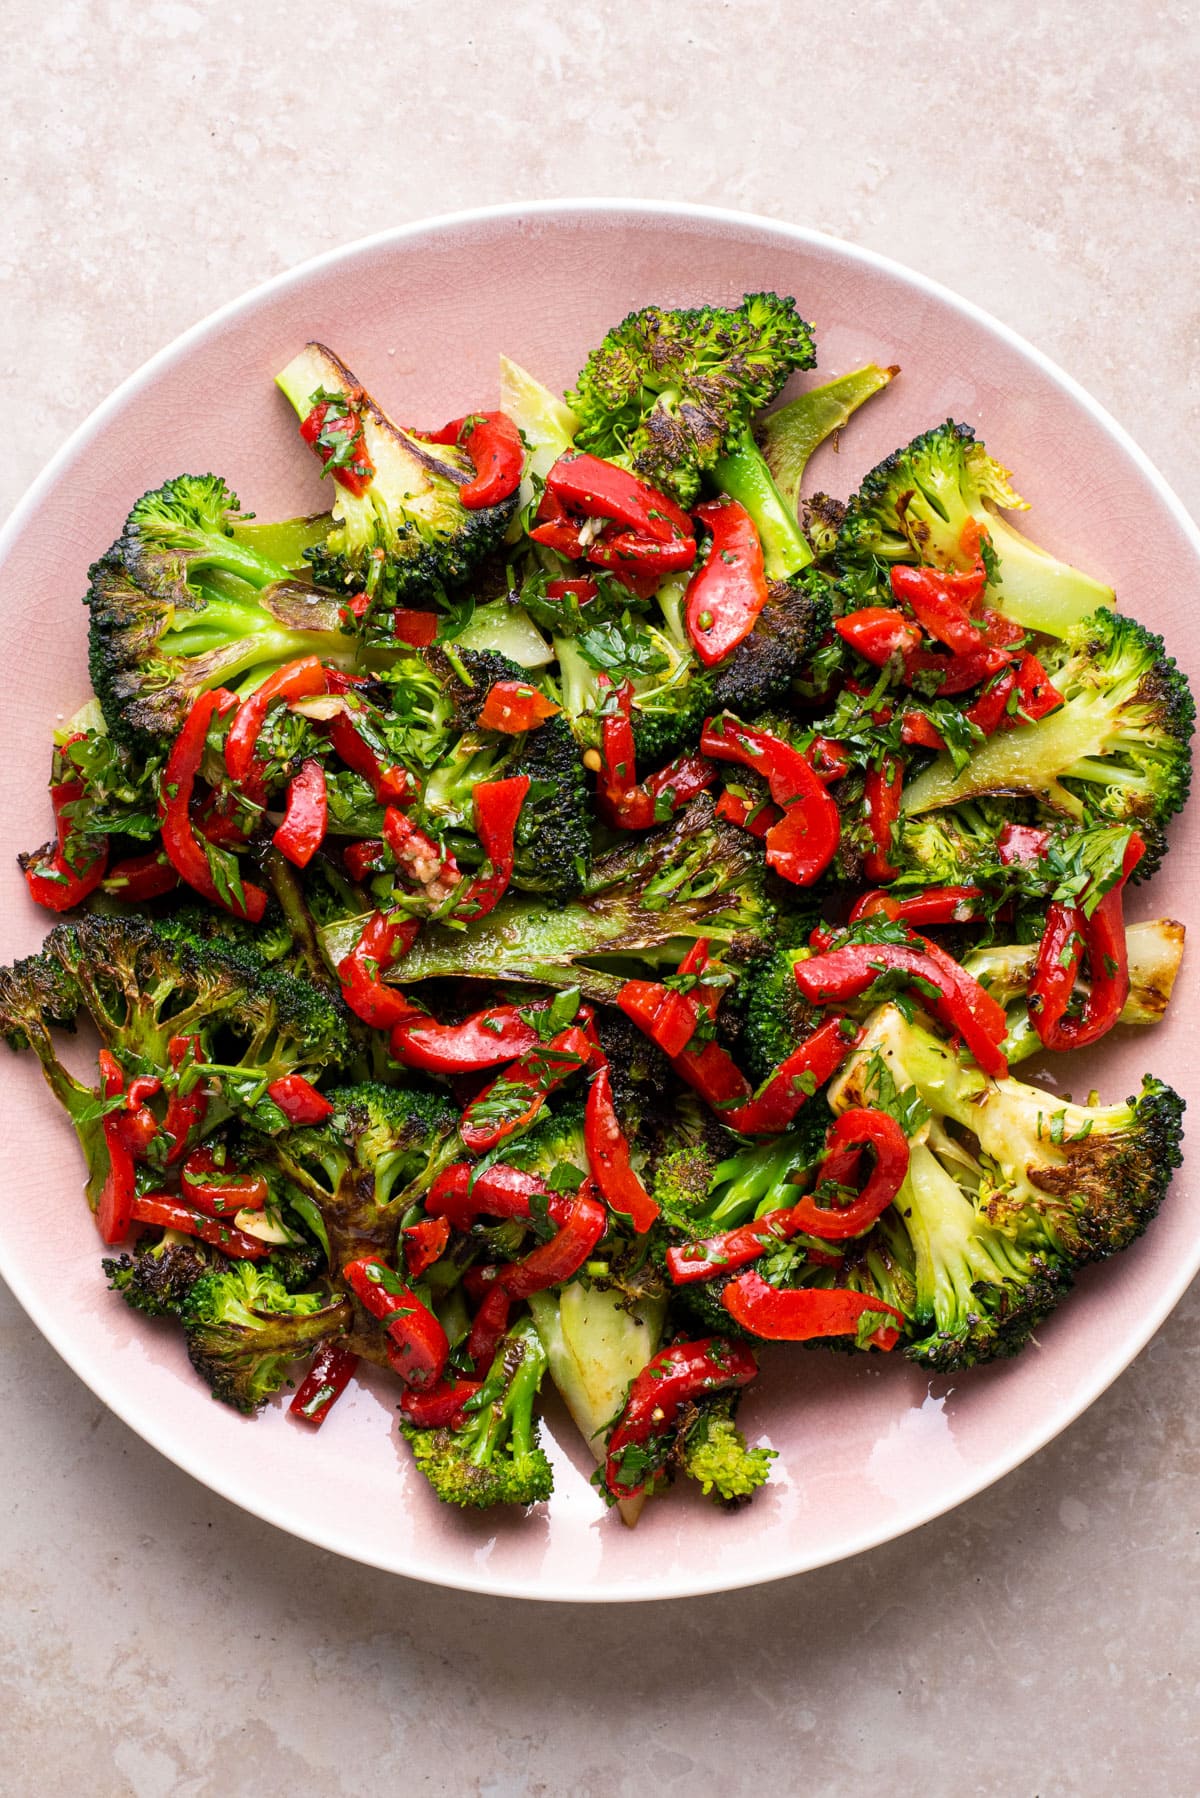 Charred broccoli with red pepper relish on a pink platter.